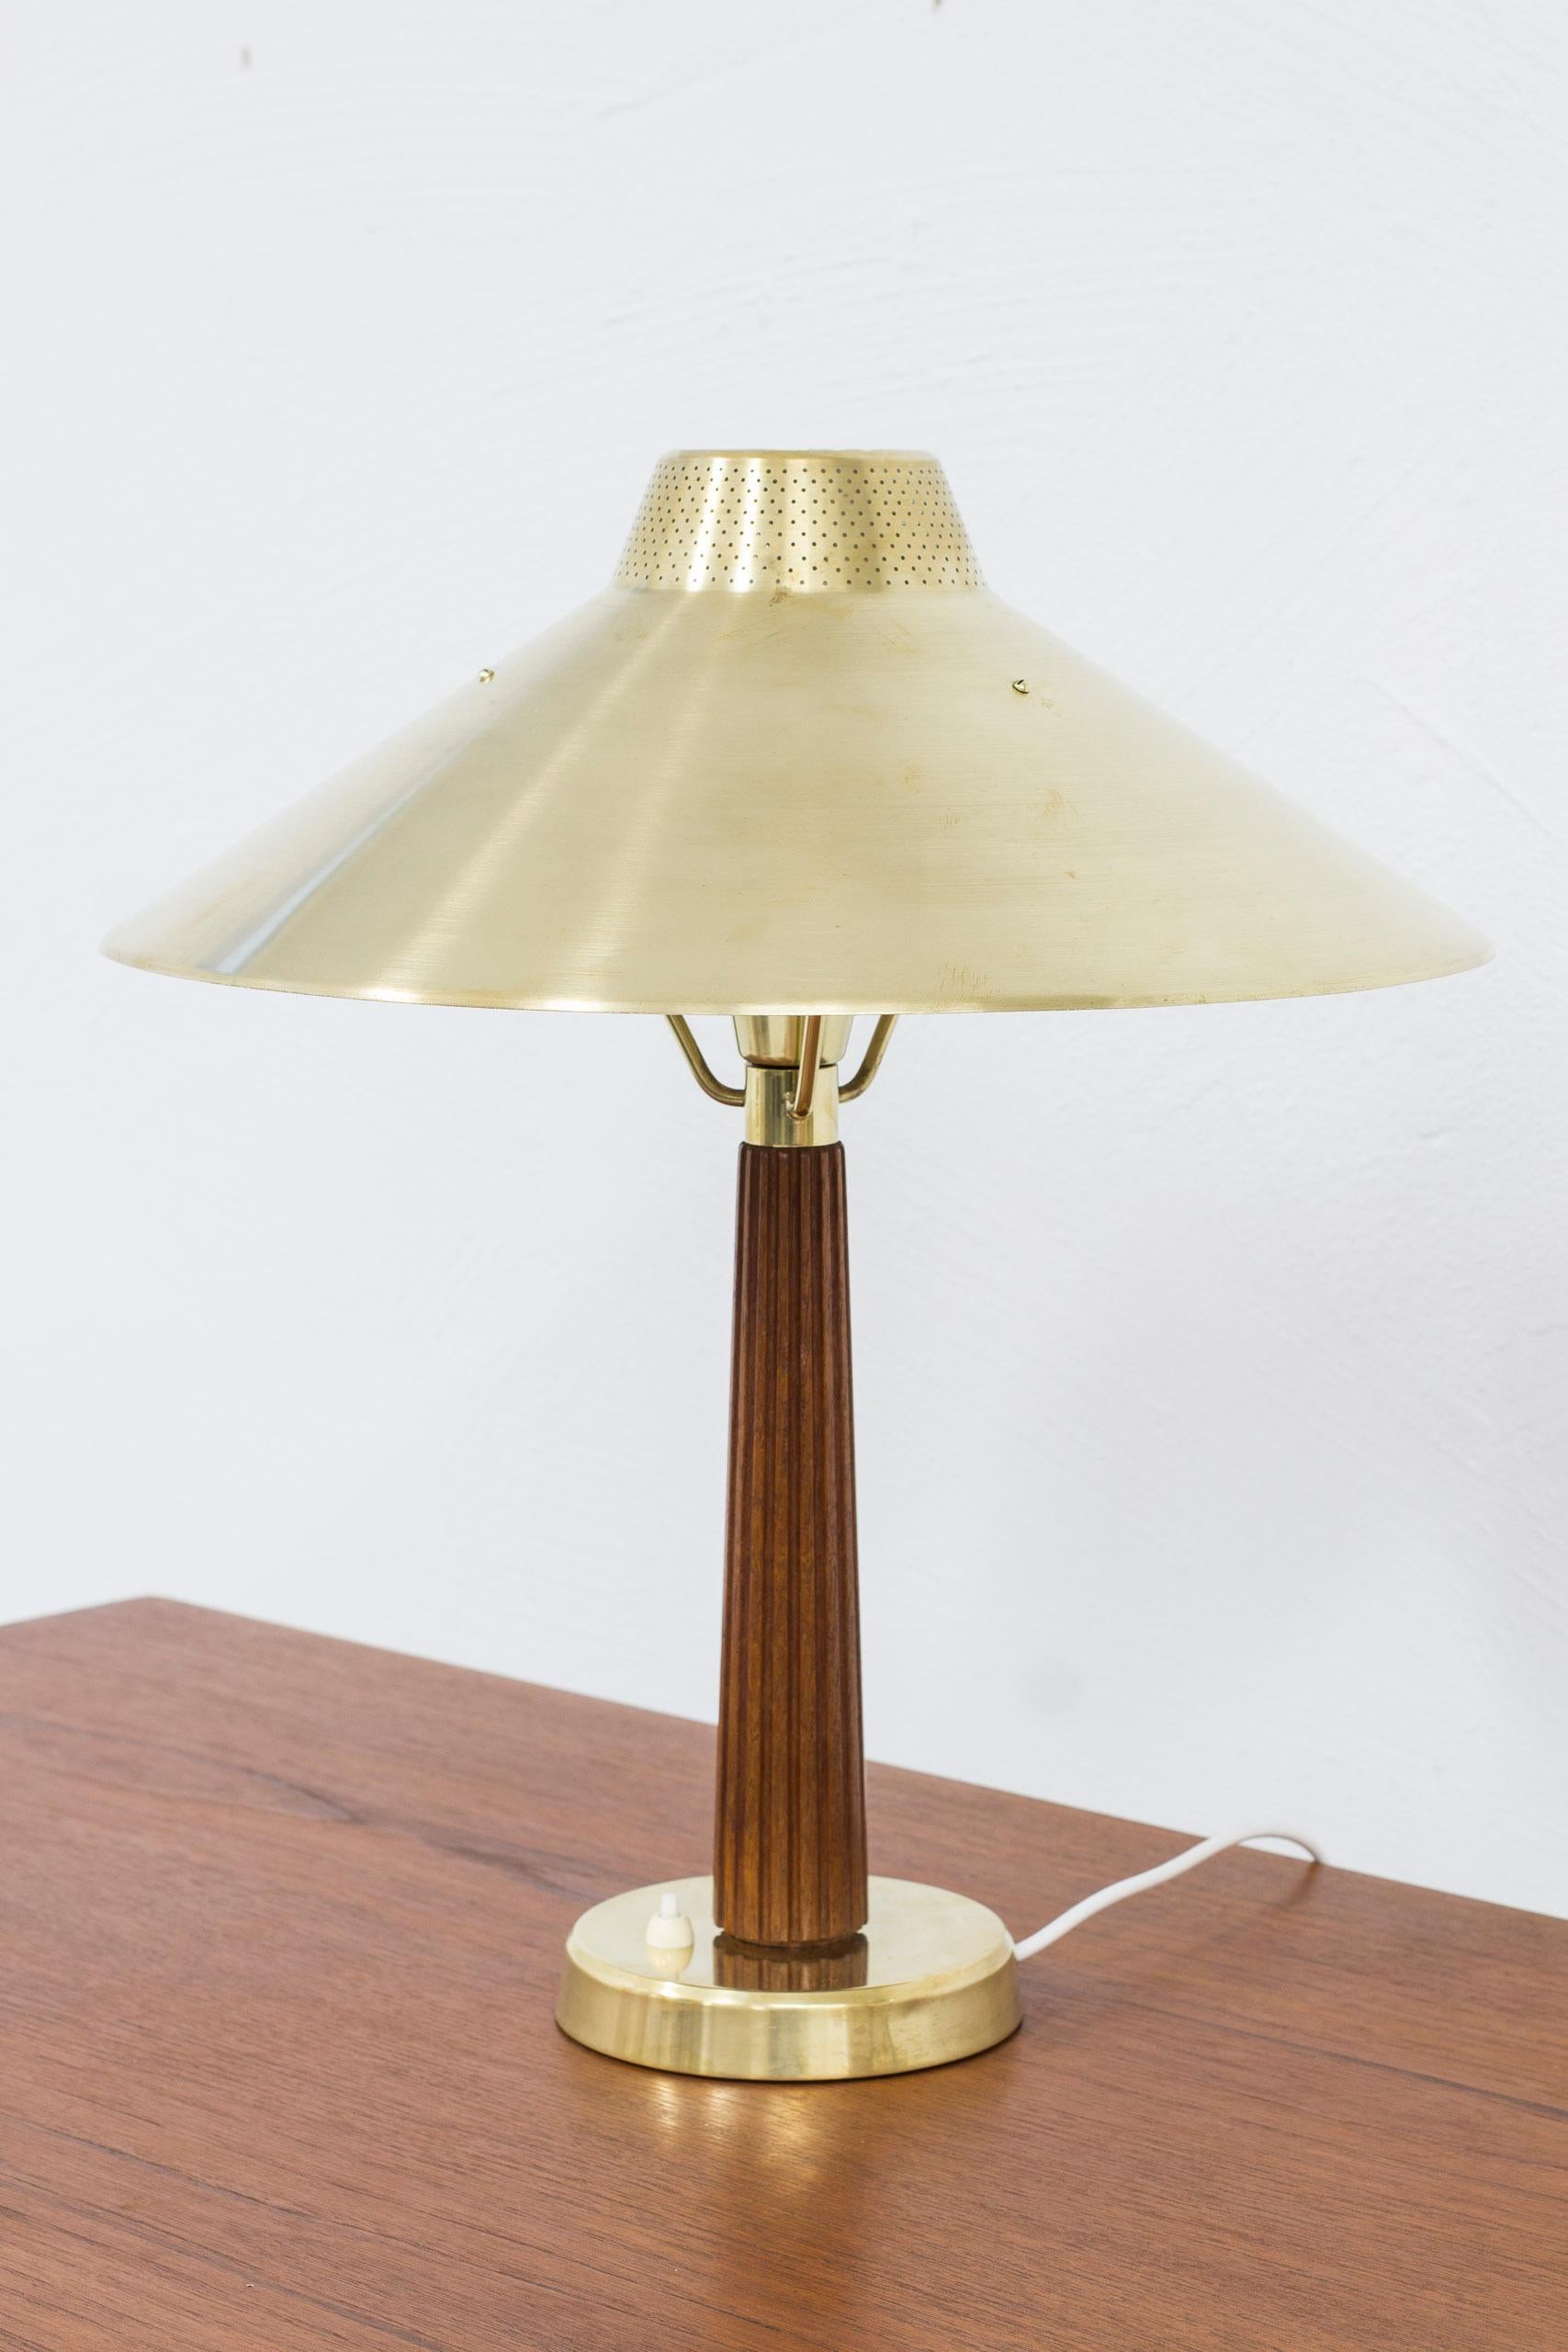 Table lamp model 716 designed by hans Bergström. Produced by Ateljé Lyktan in Åhus Sweden during the 1950s. Made from brass and teak. Light switch on the lamp in working order. Very good vintage condition with few signs of age related wear and